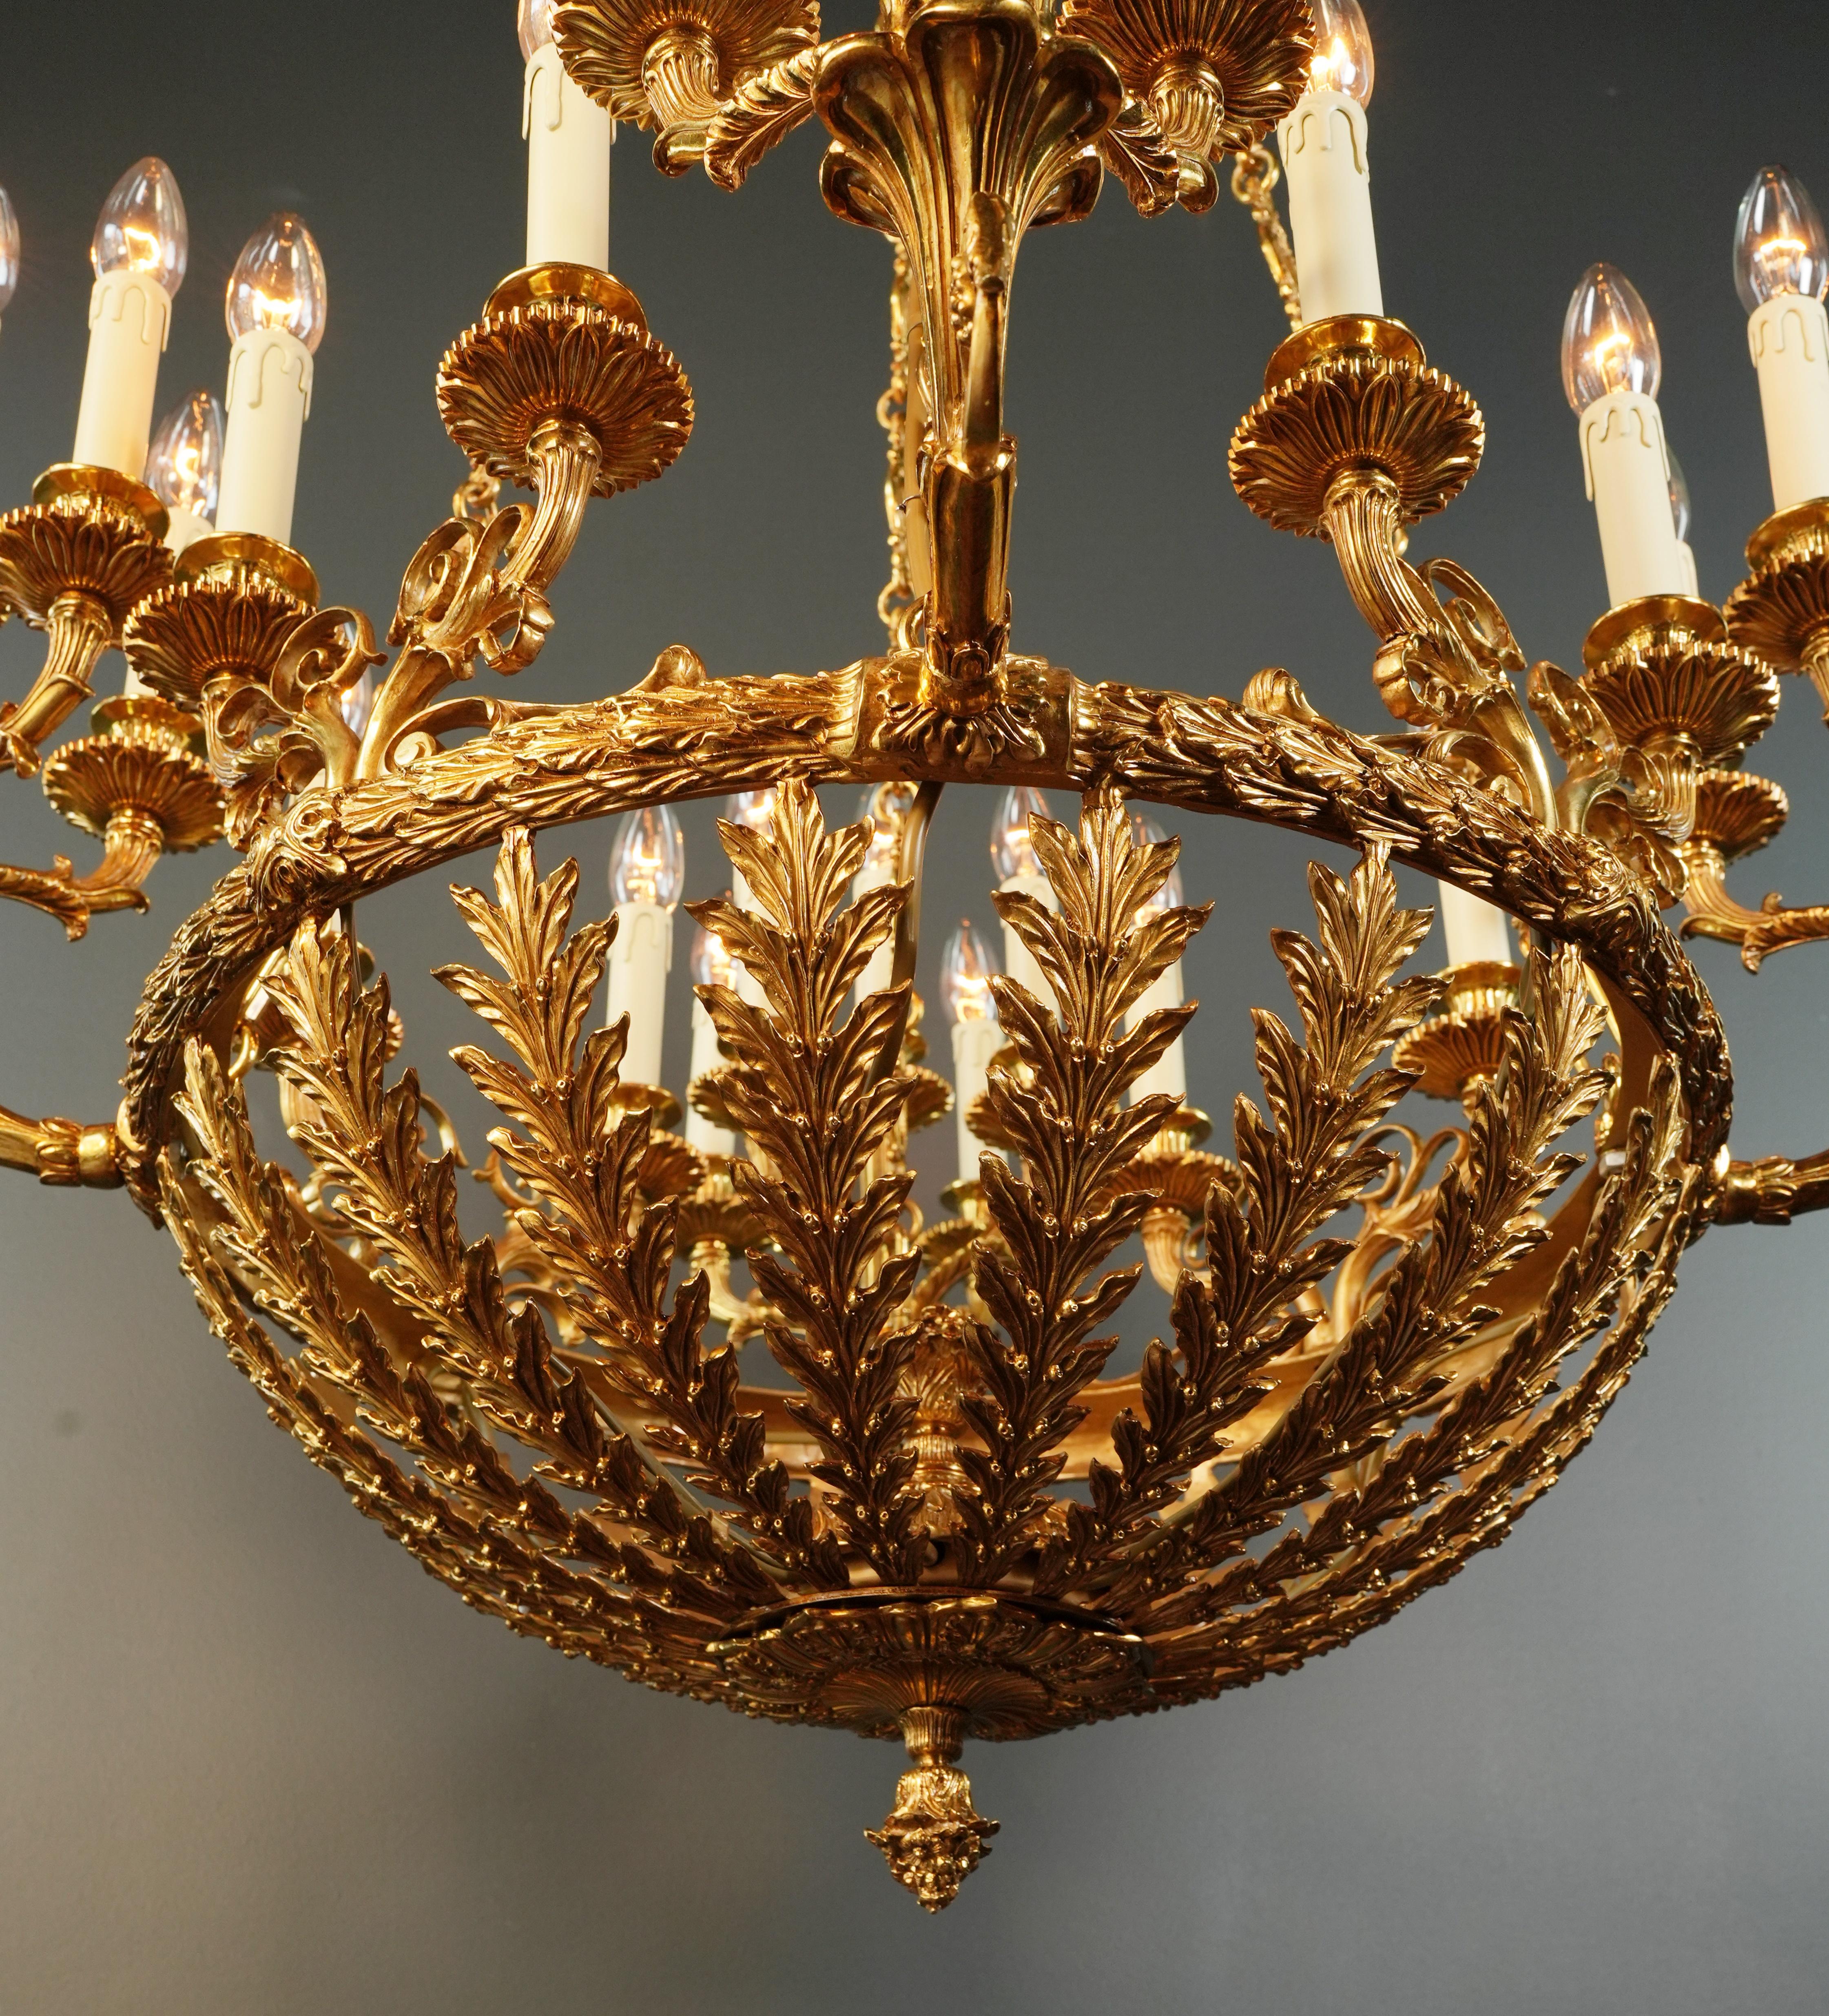 21st Century Baroque Brass Empire Chandelier Crystal Lustre Lamp Antique Gold  In New Condition For Sale In Berlin, DE